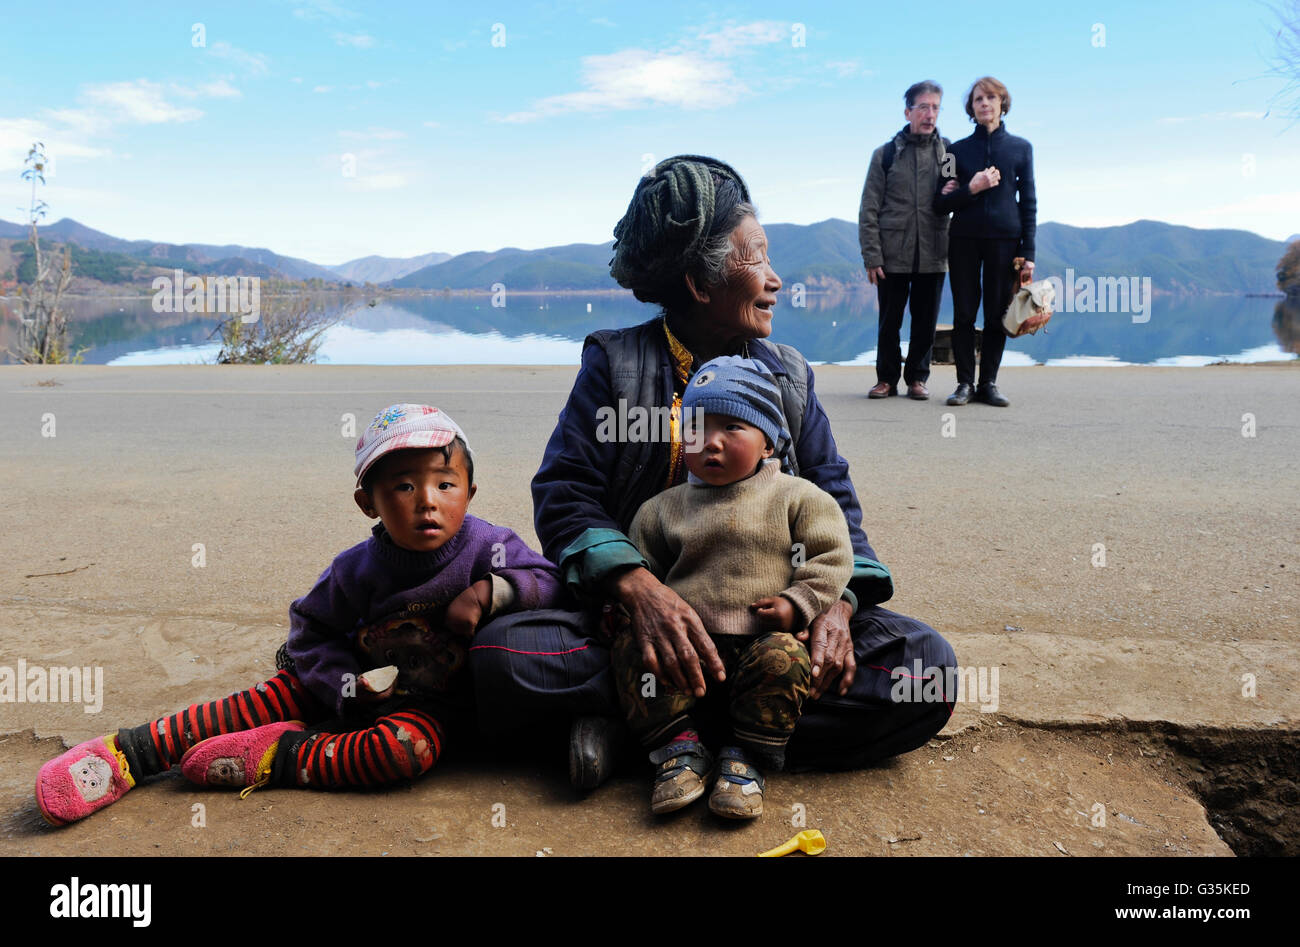 CHINA province Yunnan Lugu Lake , ethnic minority Naxi, old woman with children, two french tourist , culture clash Stock Photo